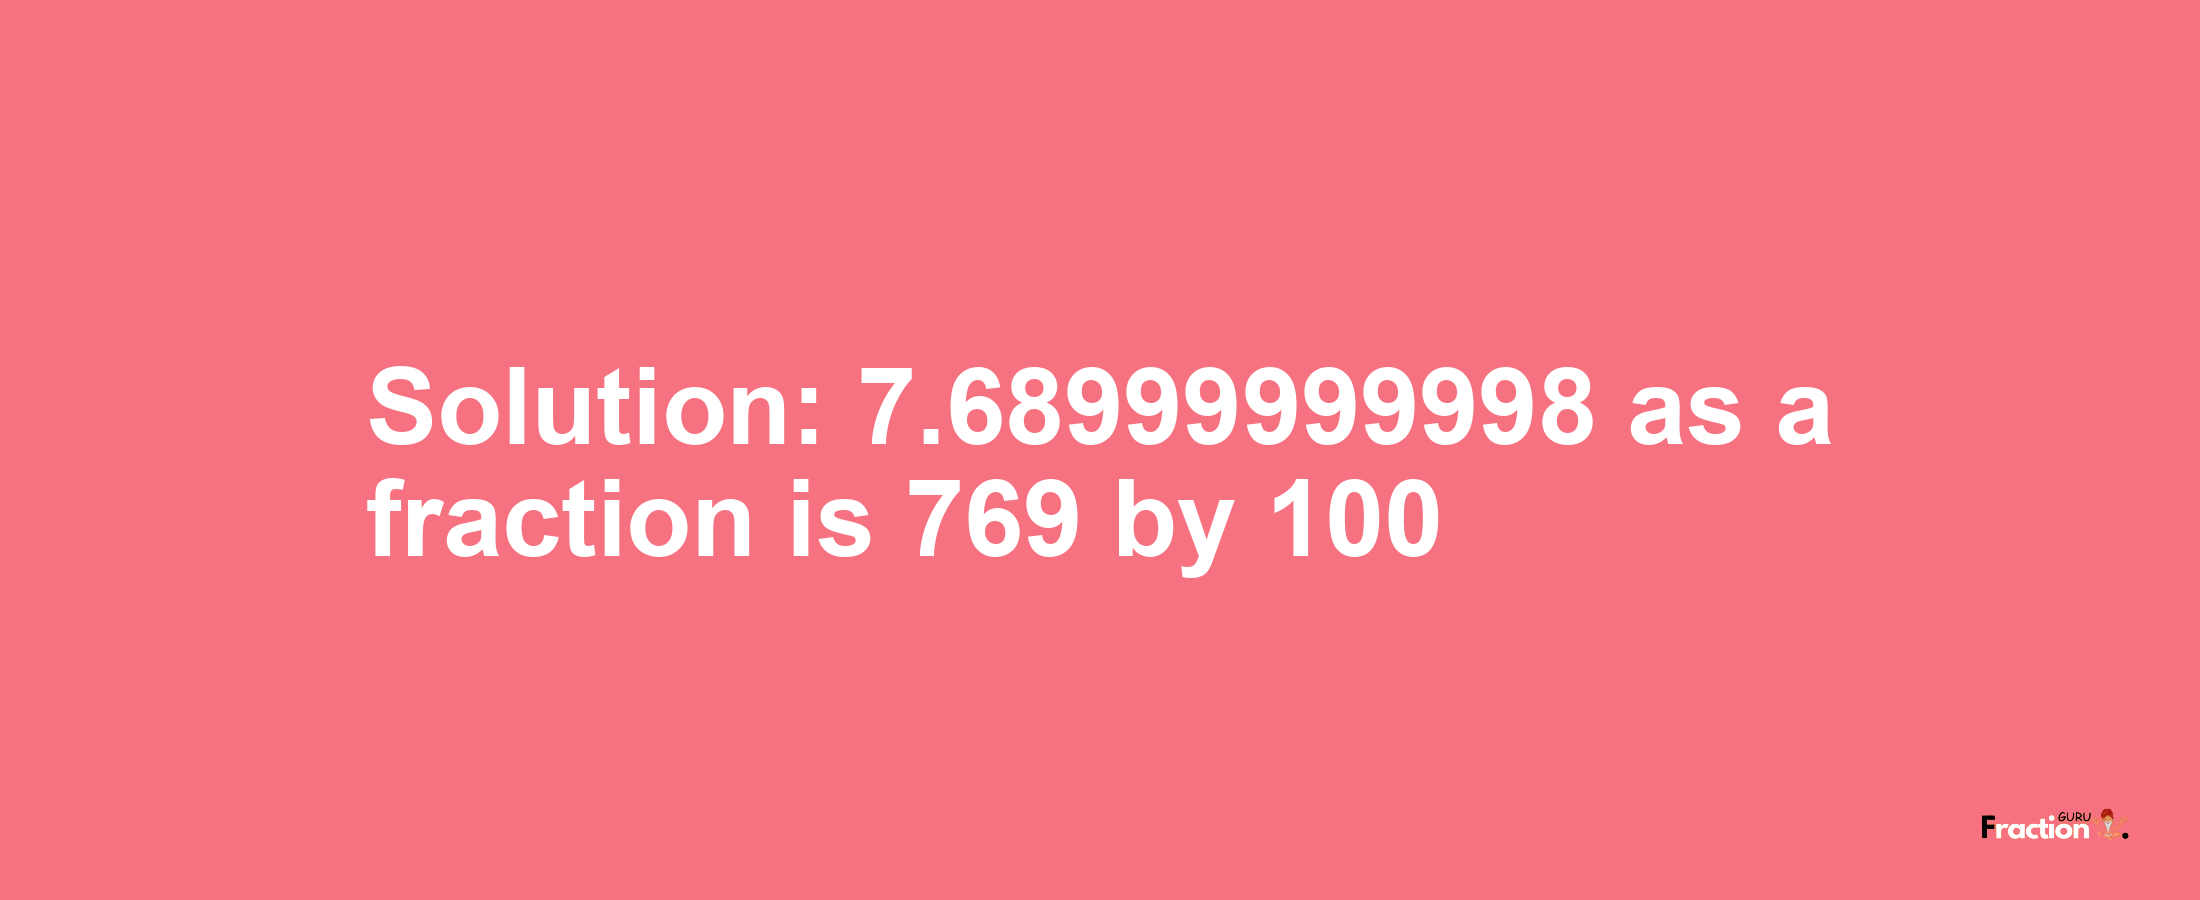 Solution:7.68999999998 as a fraction is 769/100